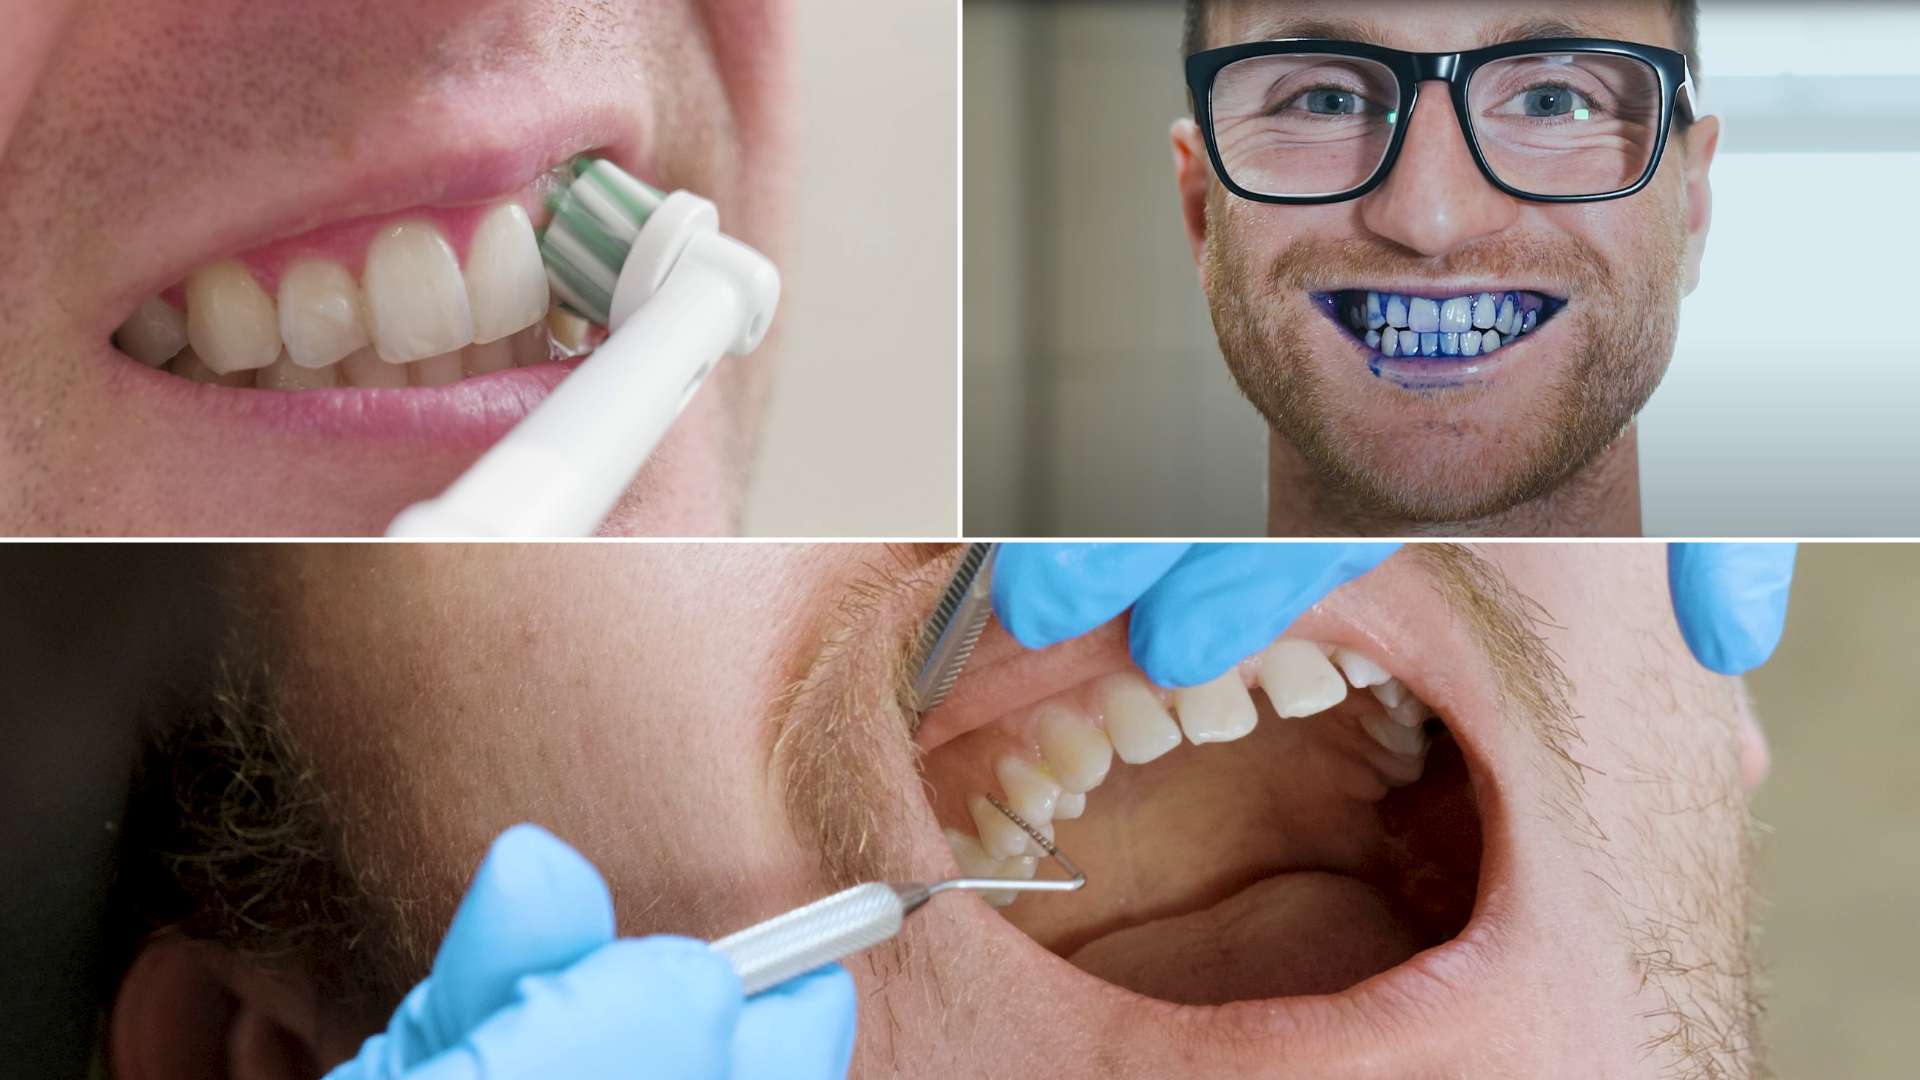 Montage of teeth being brushed and checked